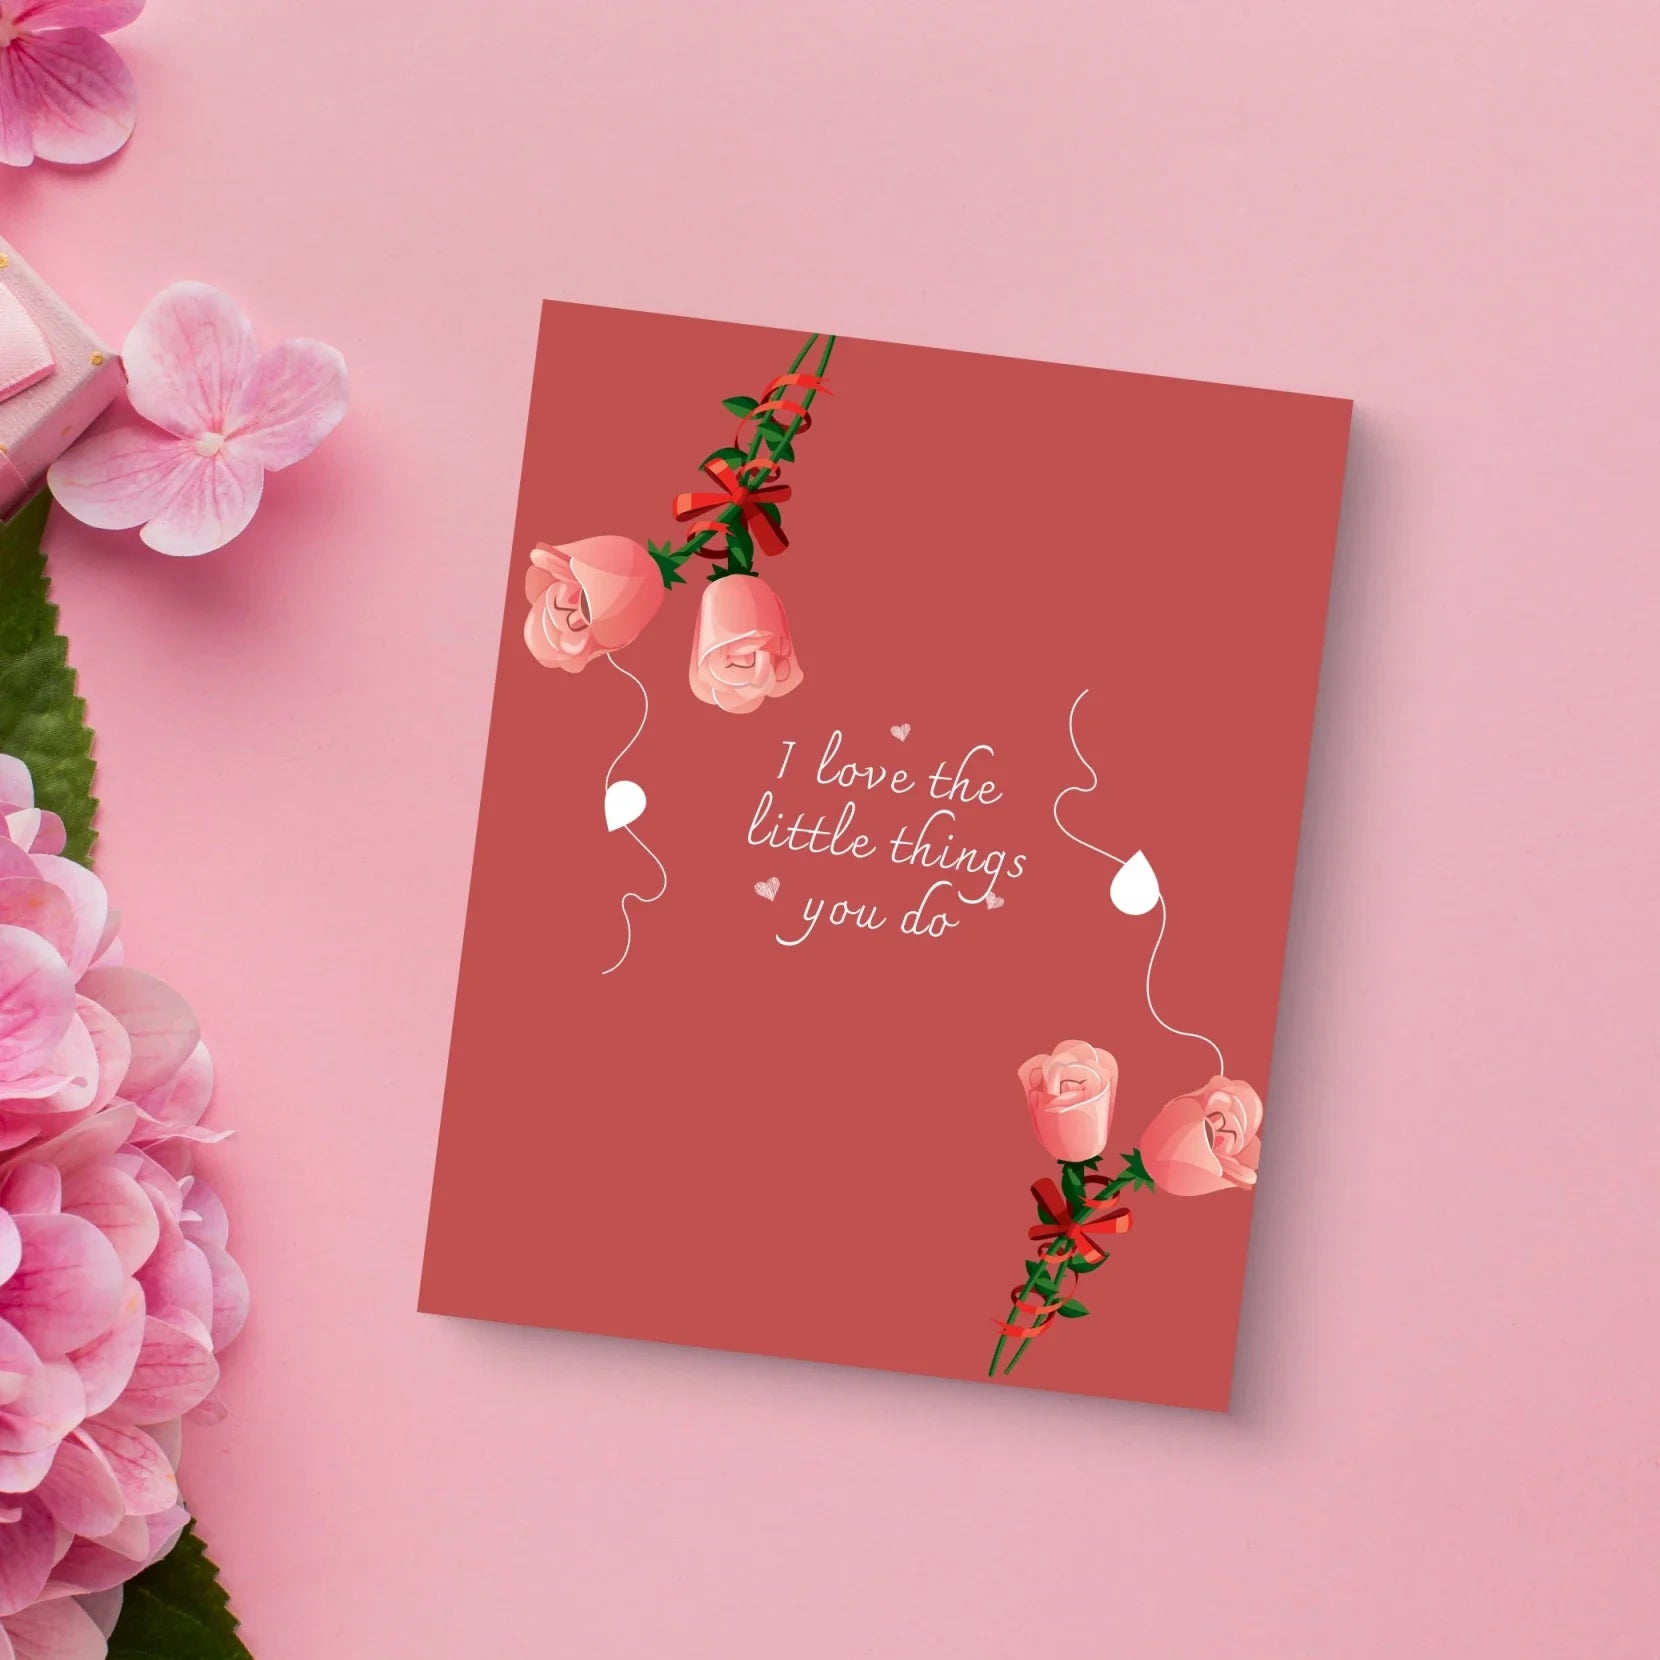 """Pen down your thoughts and feelings for your fiance and hope for the best with our unique lettercard. ""  "